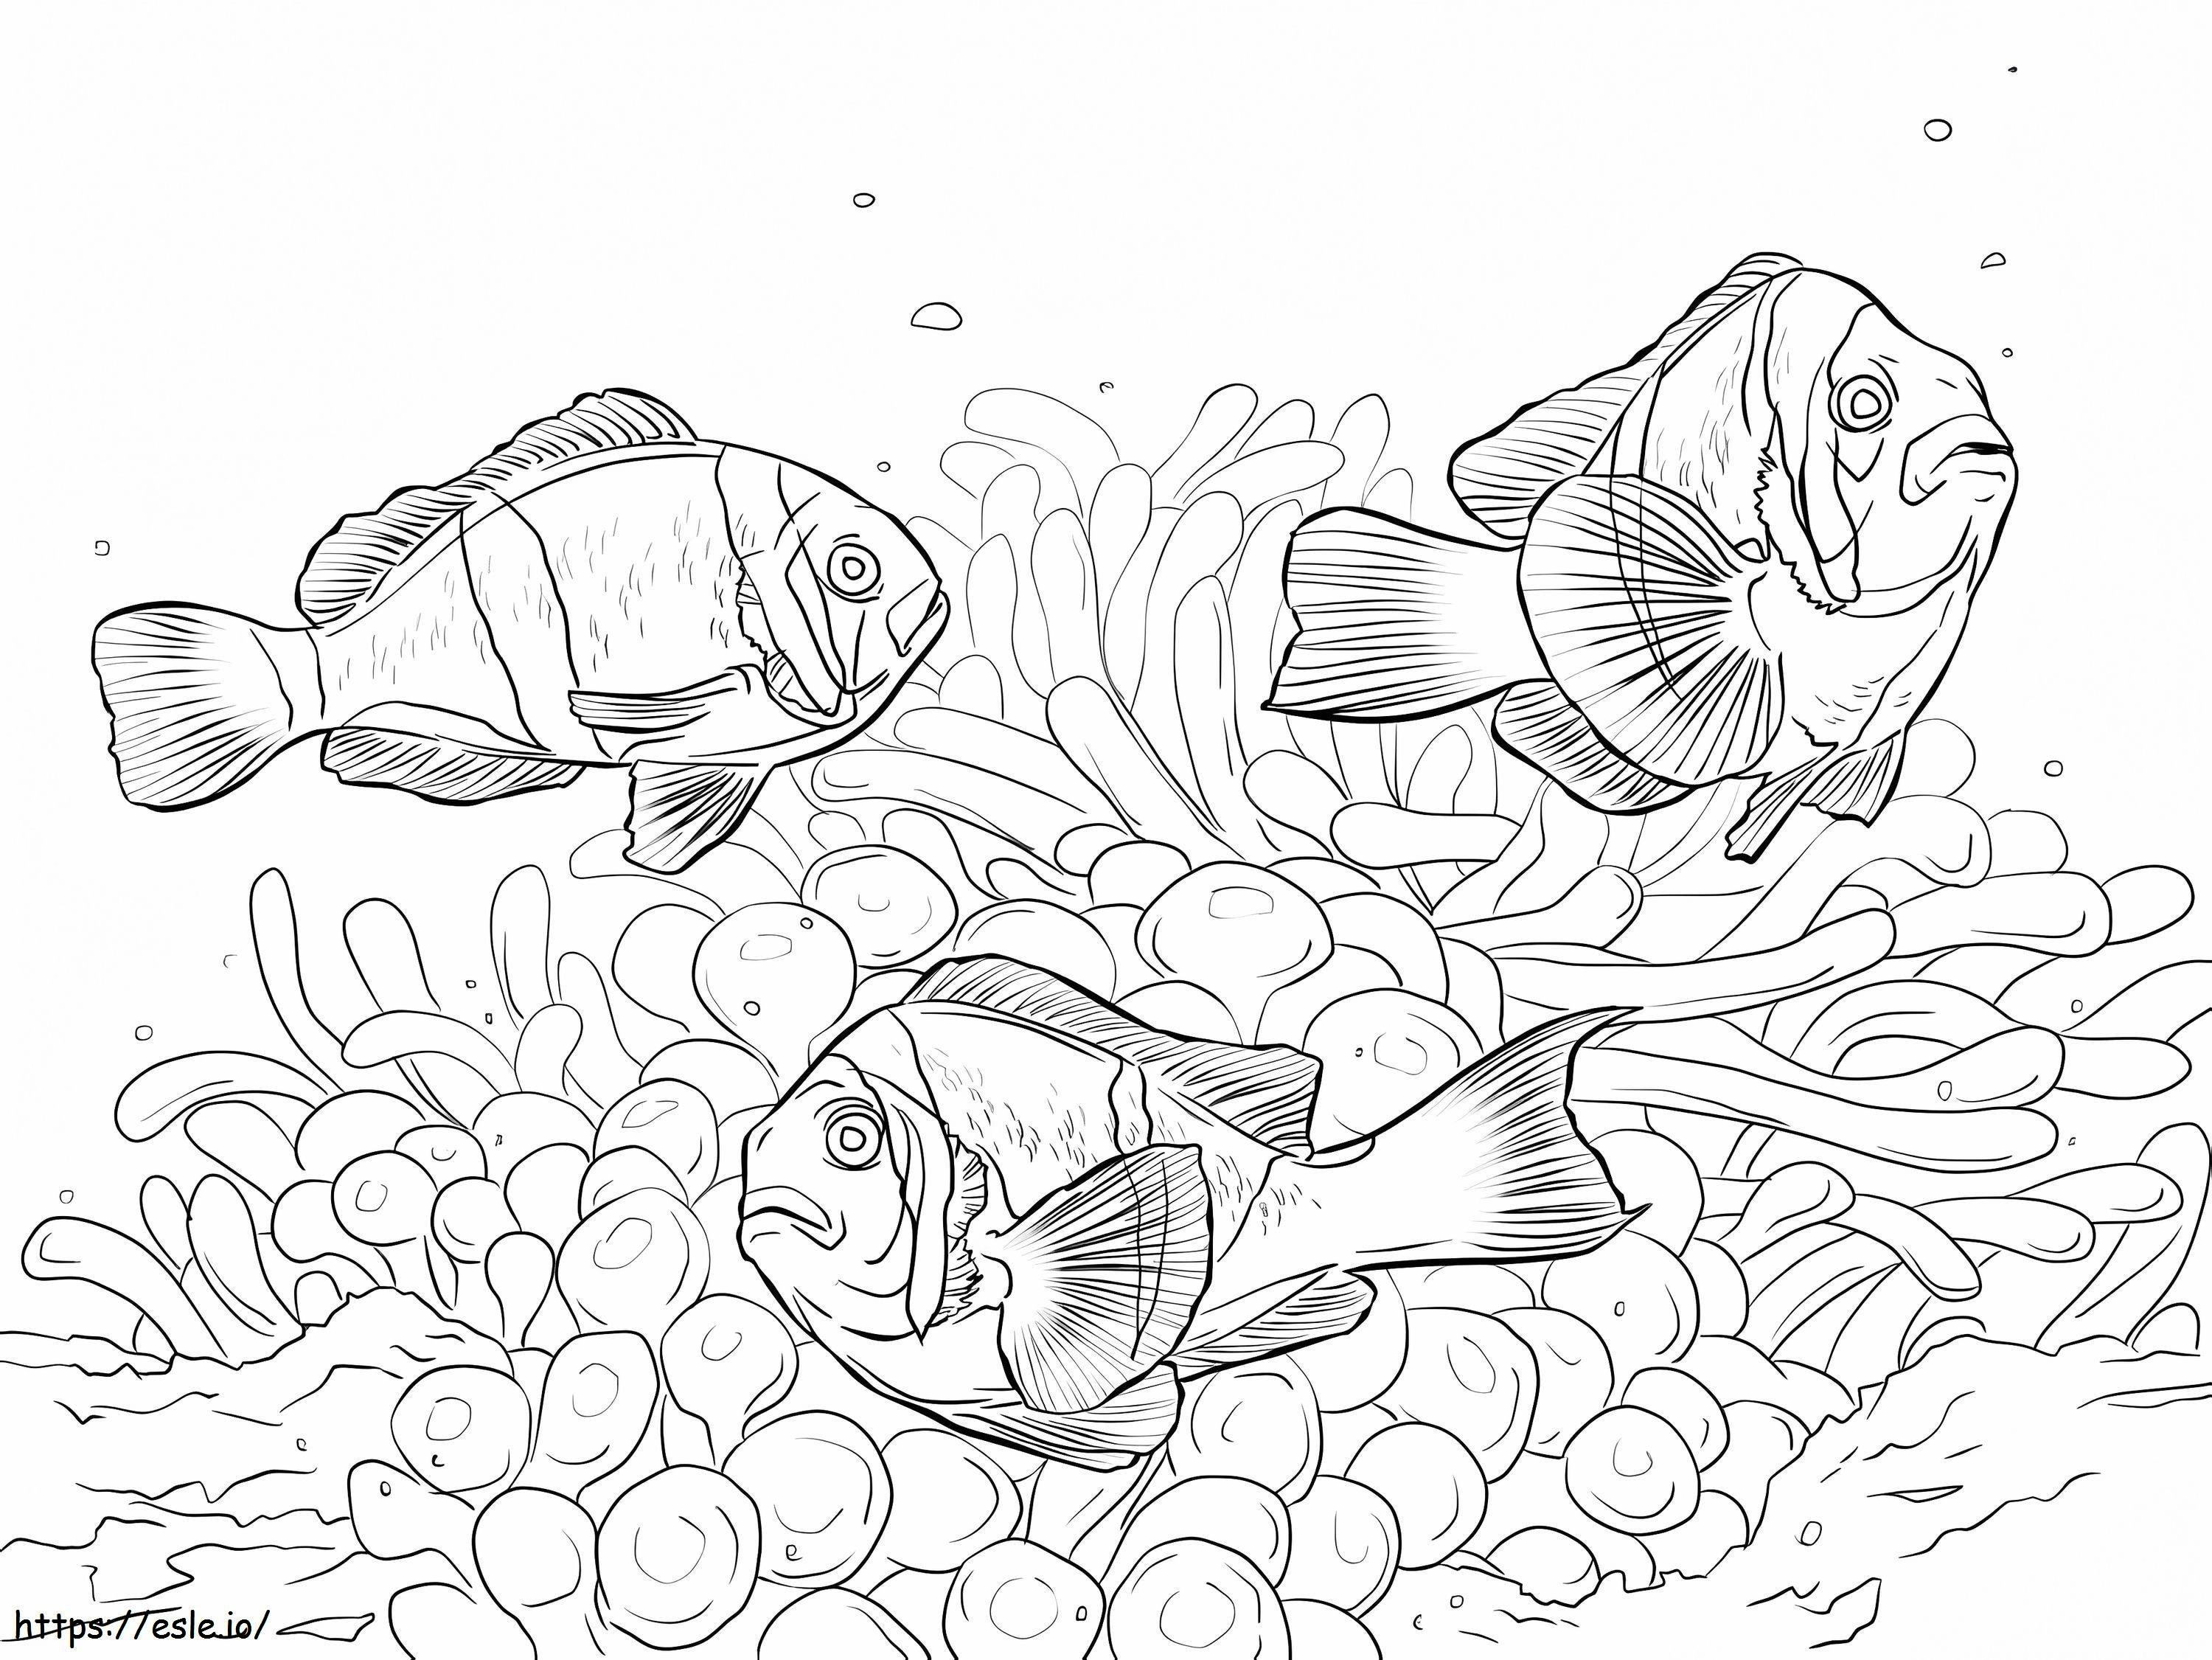 Allards Clownfishes 1 coloring page